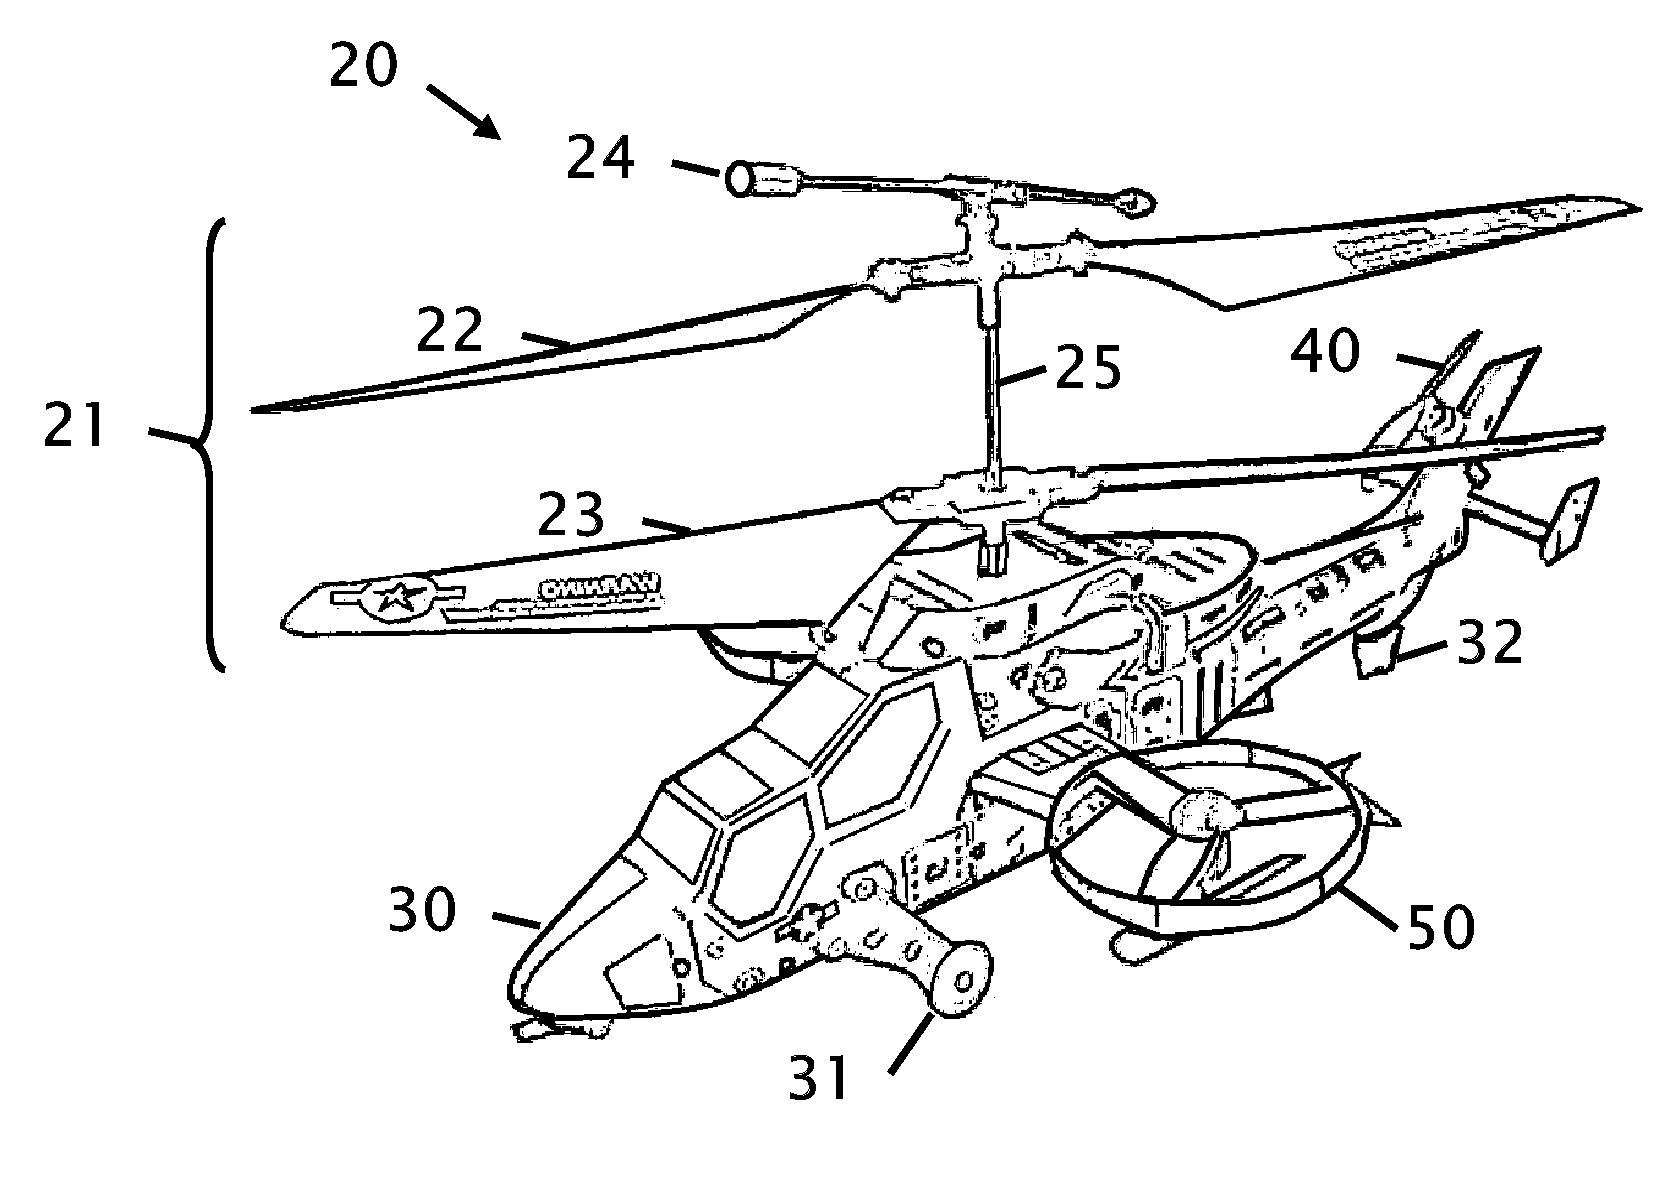 Helicopter with remote control